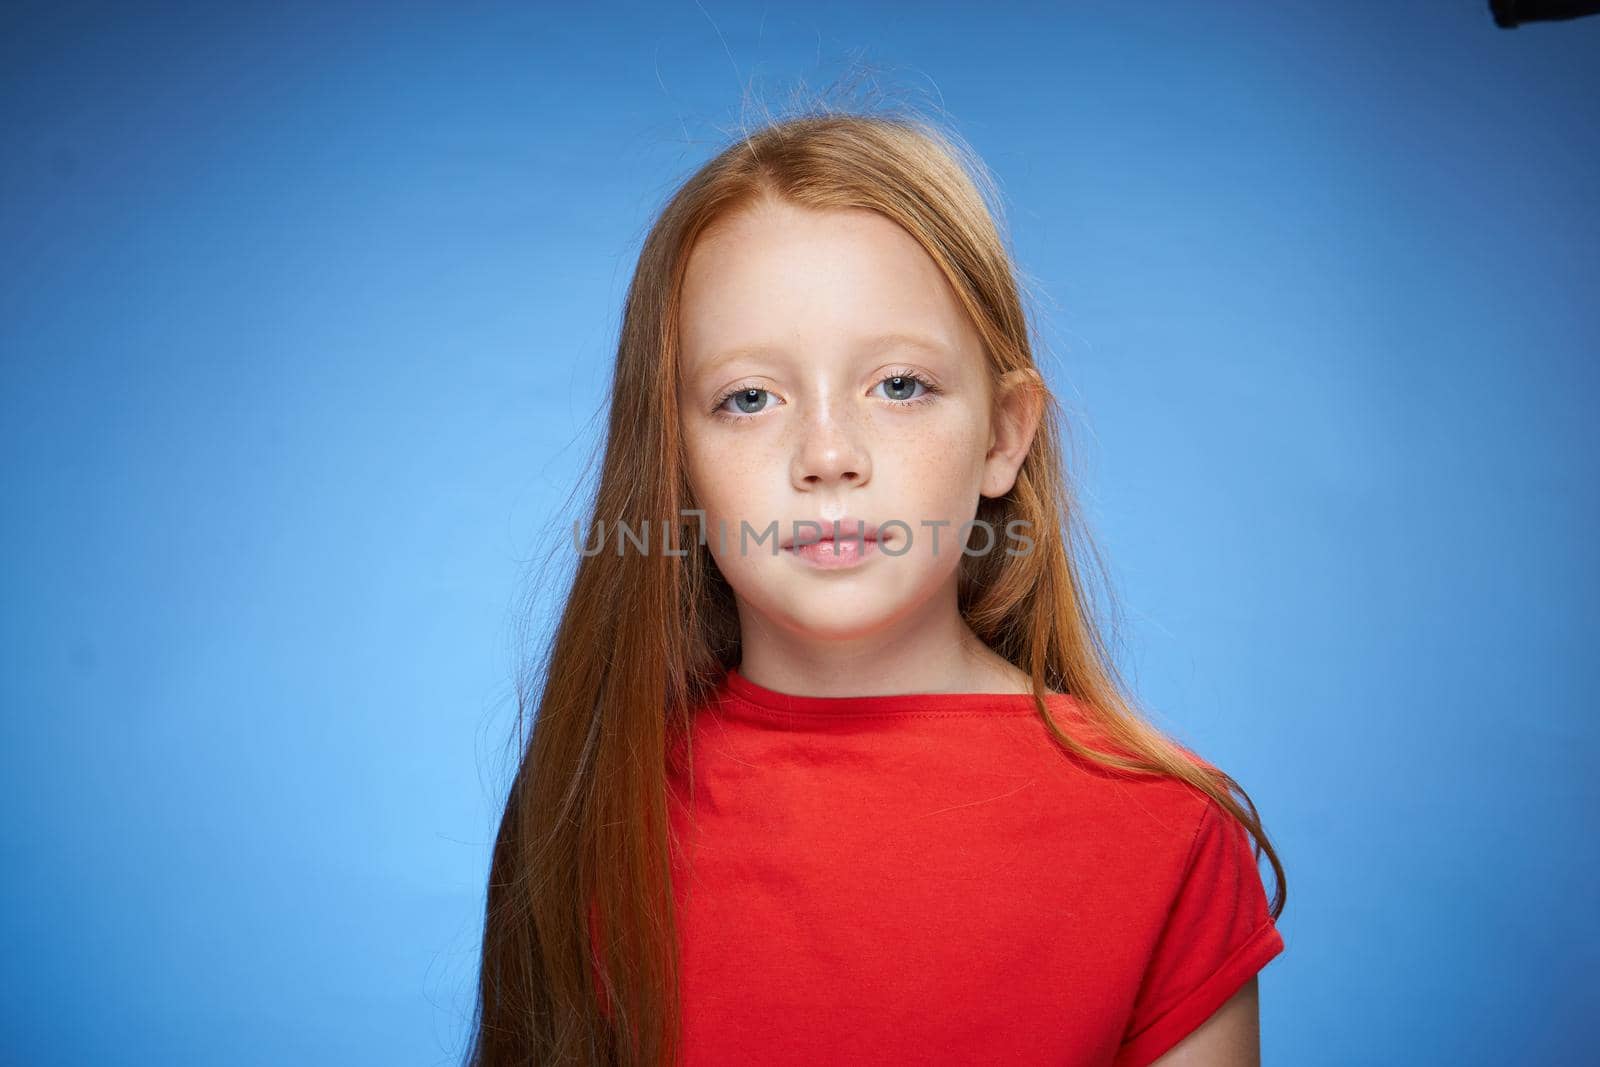 cheerful cute red-haired girl childhood blue background. High quality photo